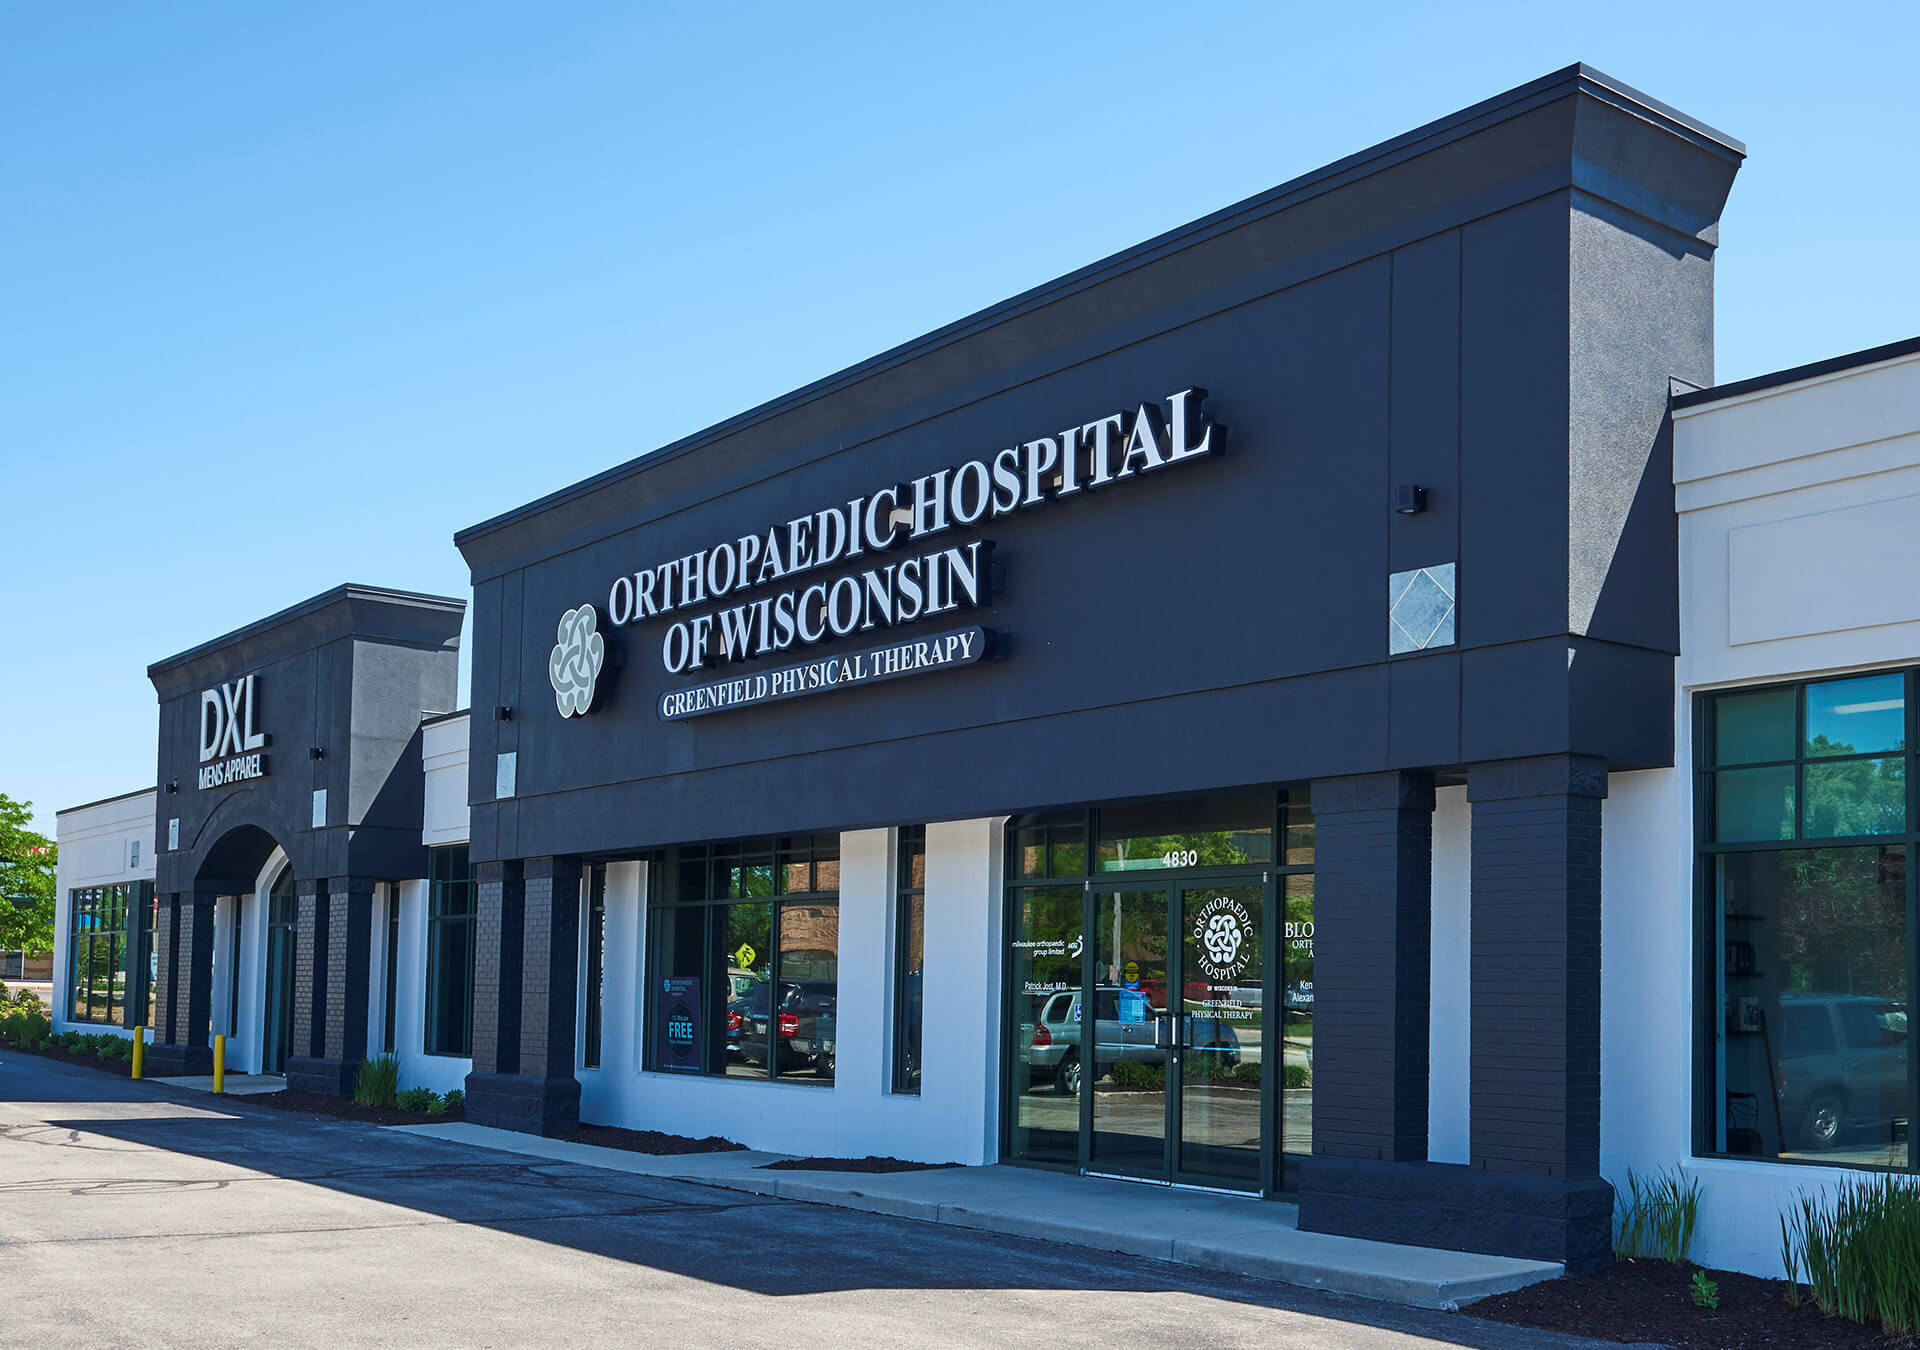 Orthopaedic Hospital of Wisconsin in Greenfield, WI